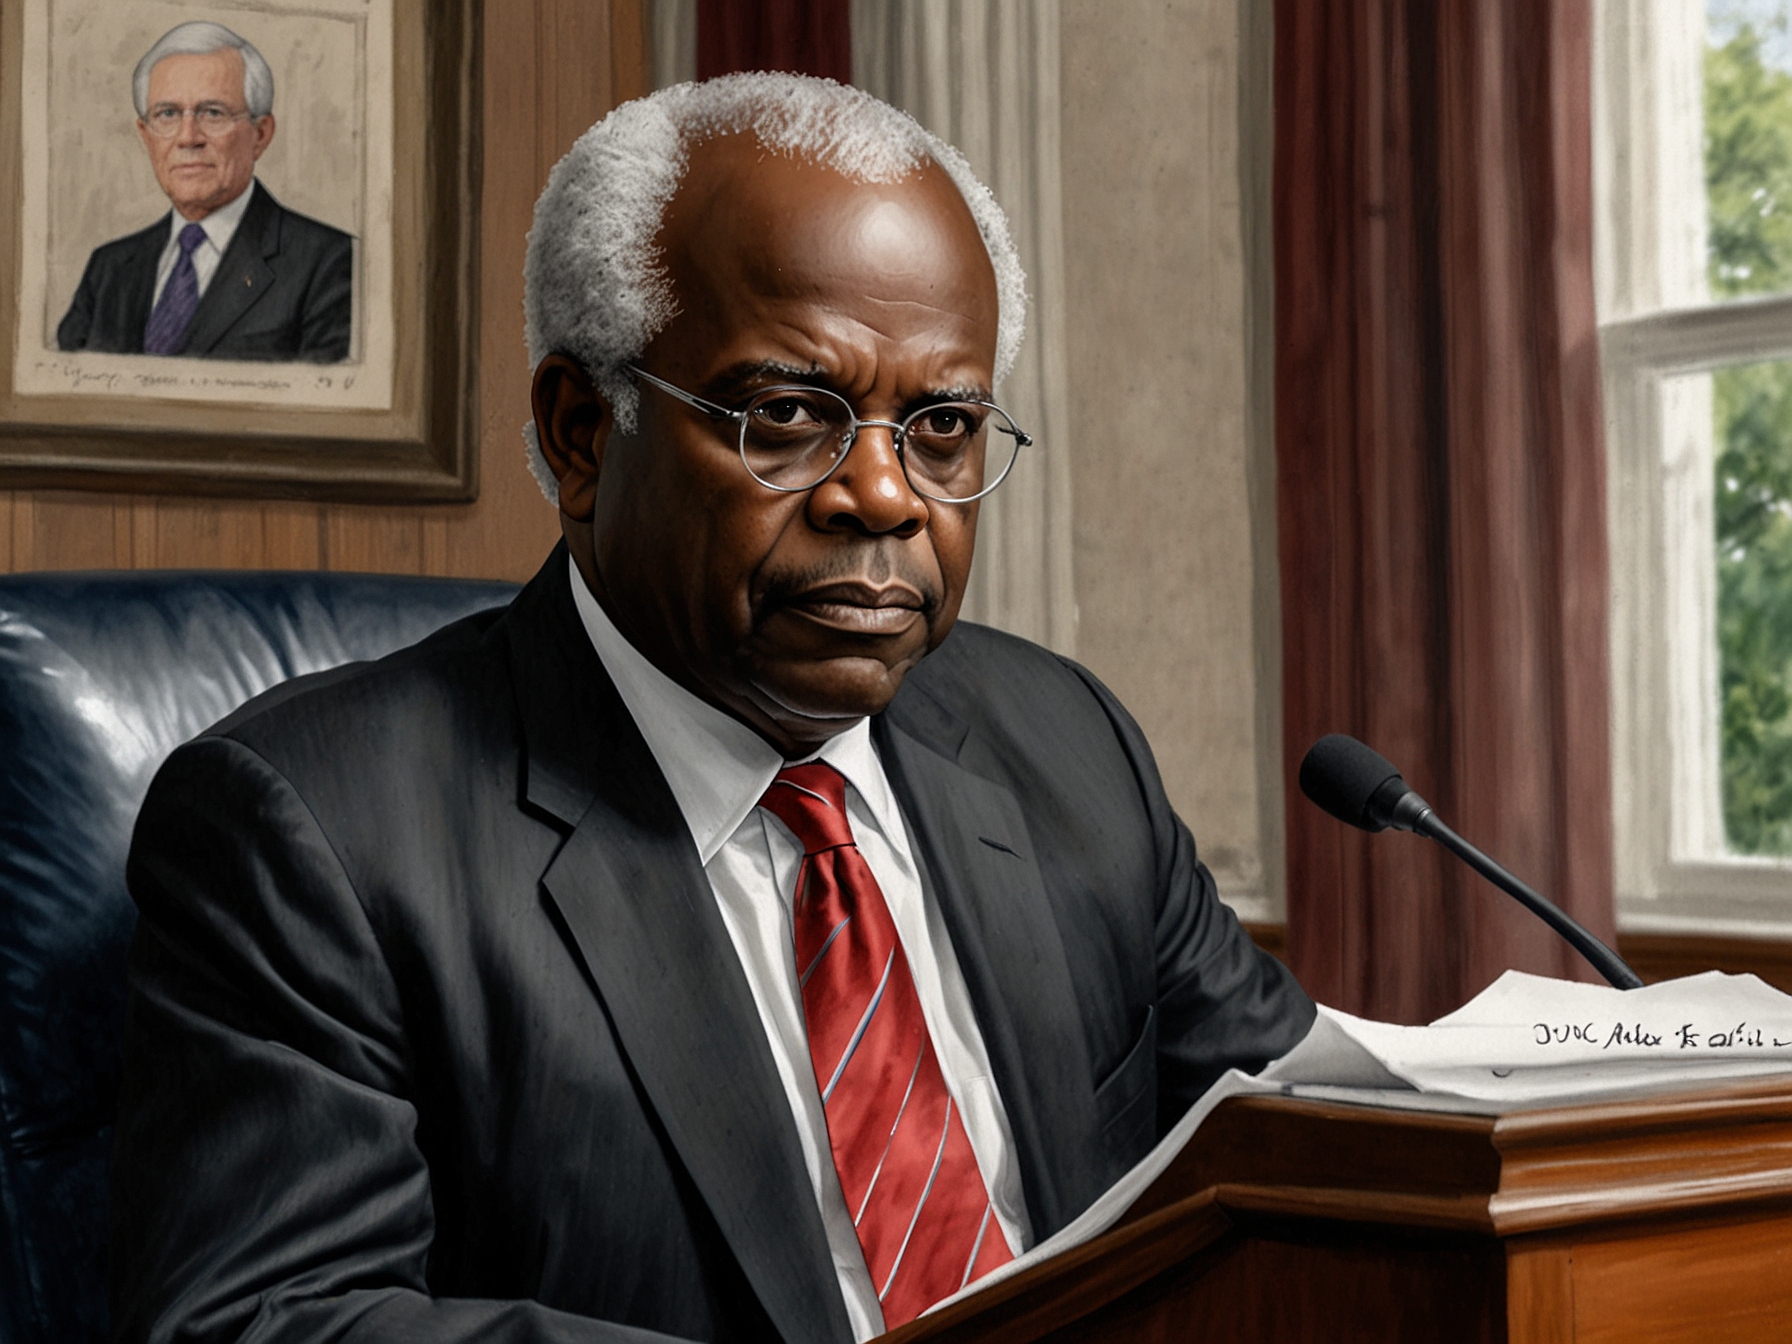 Justice Clarence Thomas articulates concerns about the constitutional validity of Special Counsel Jack Smith’s appointment, highlighting potential deviations from established legal guidelines.